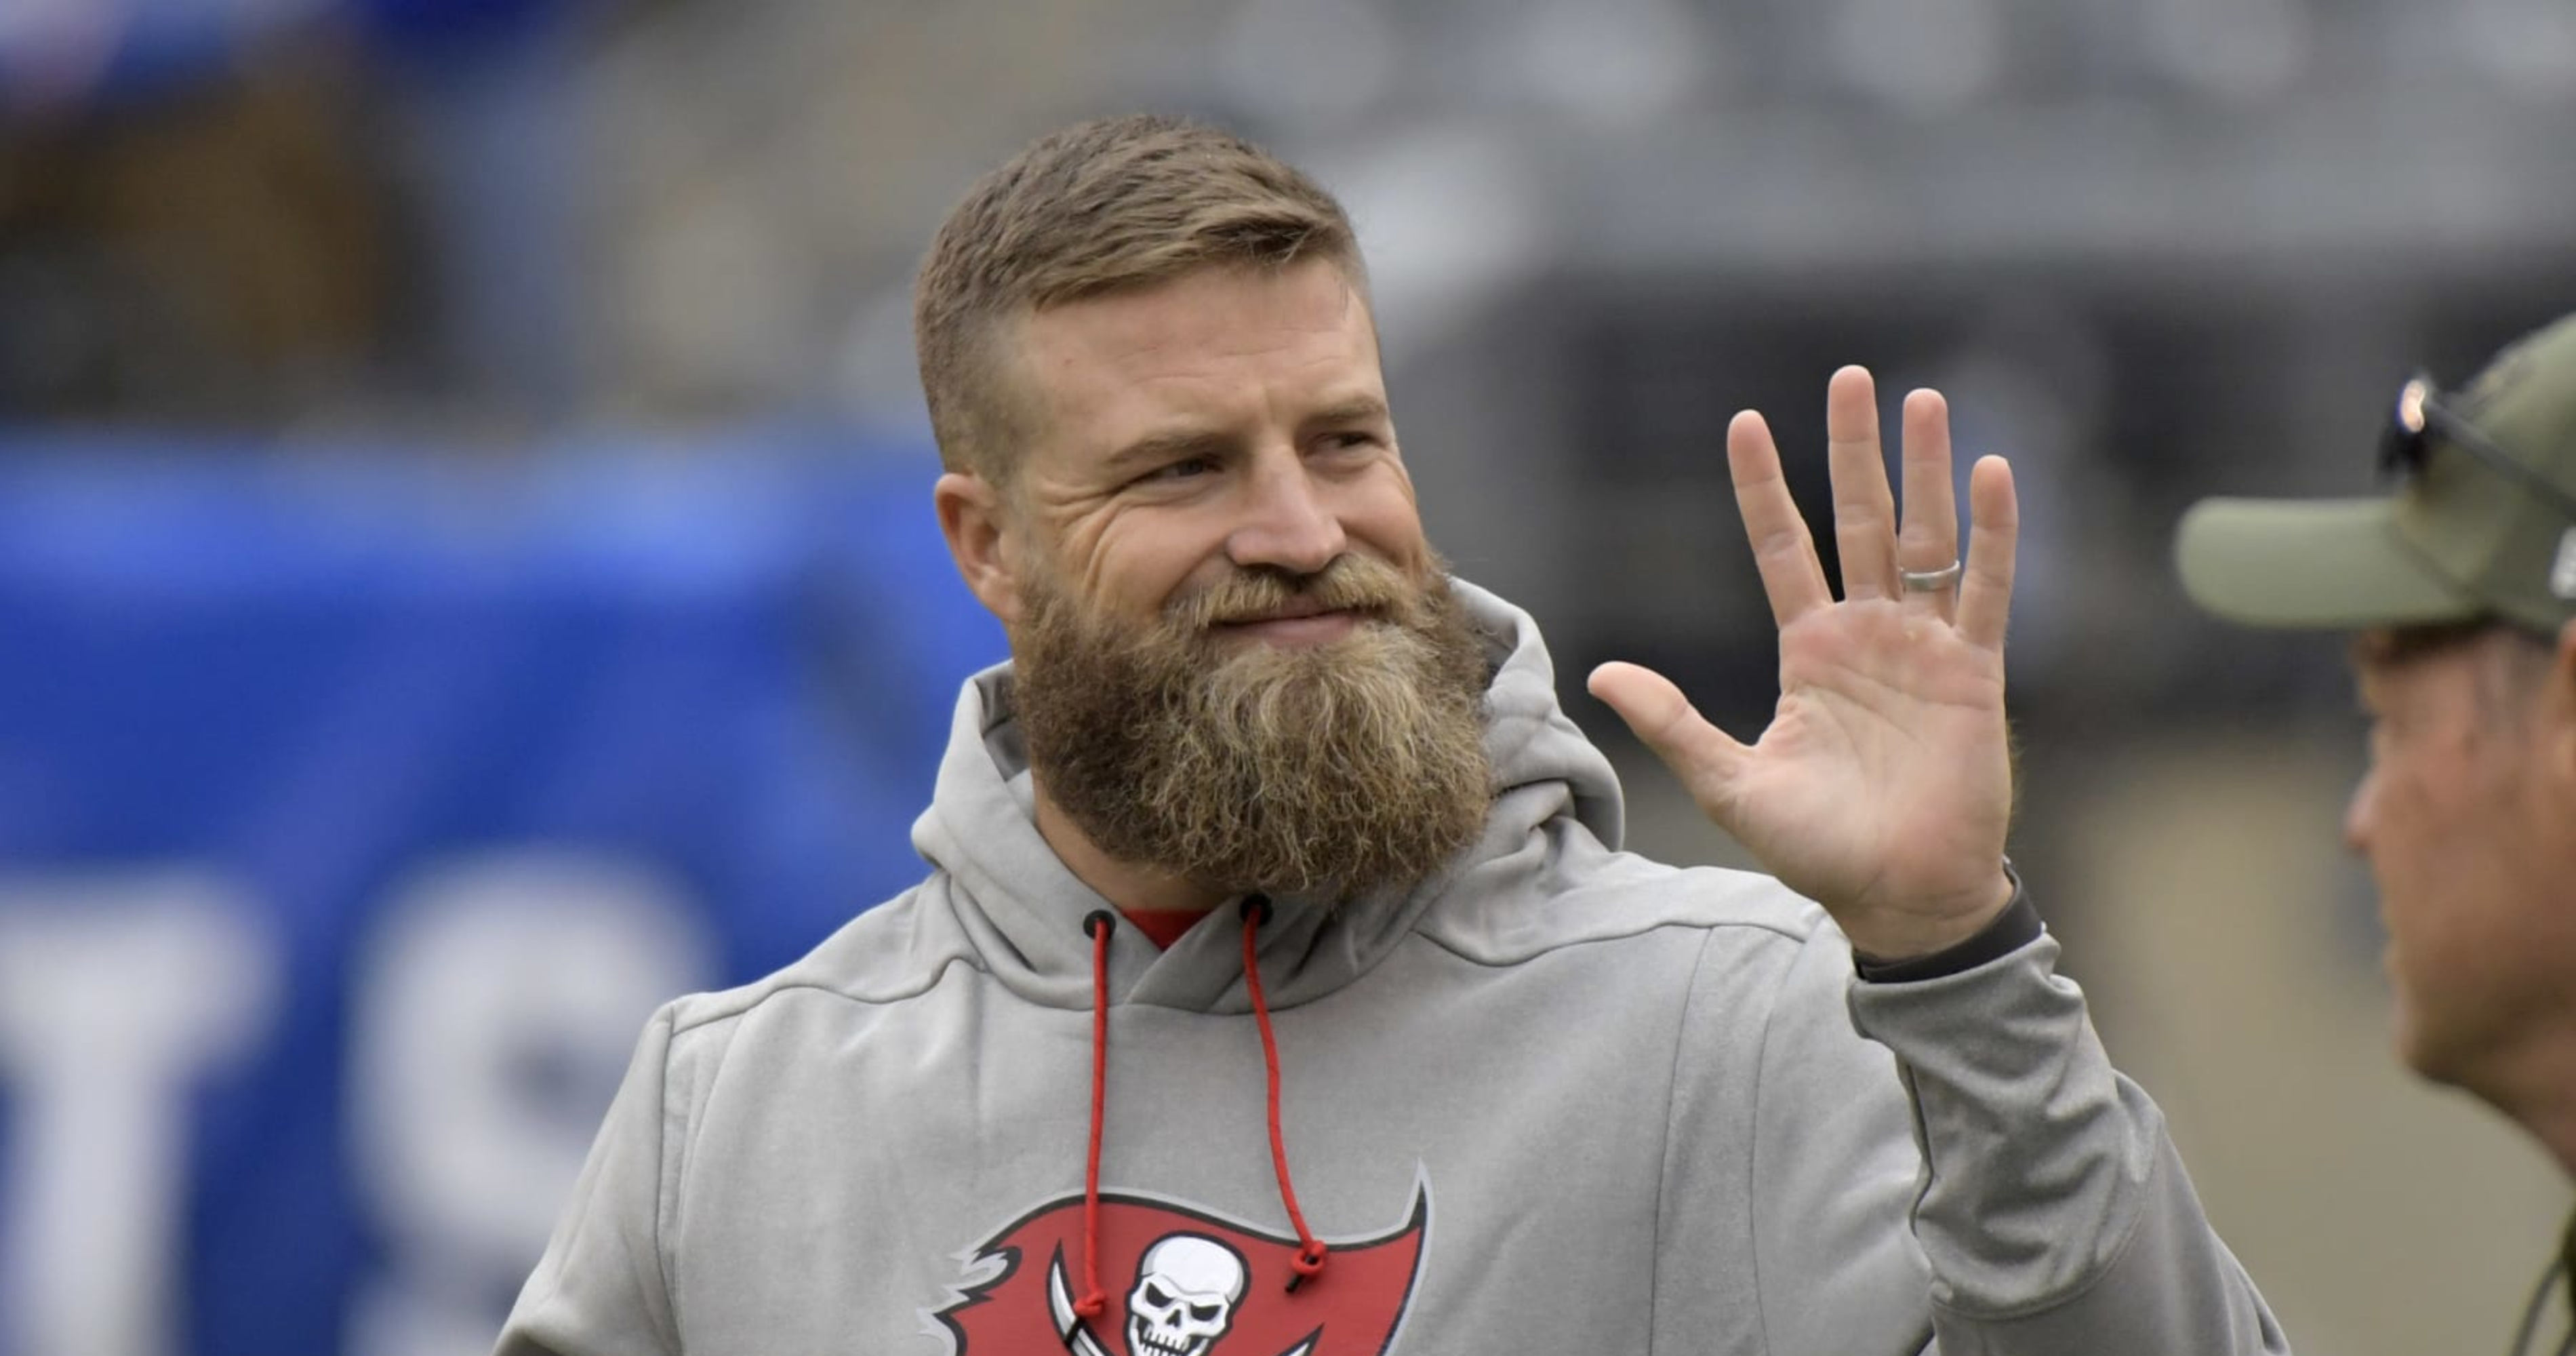 Ryan Fitzpatrick signs with the Bucs, the 7th team of his 13-year